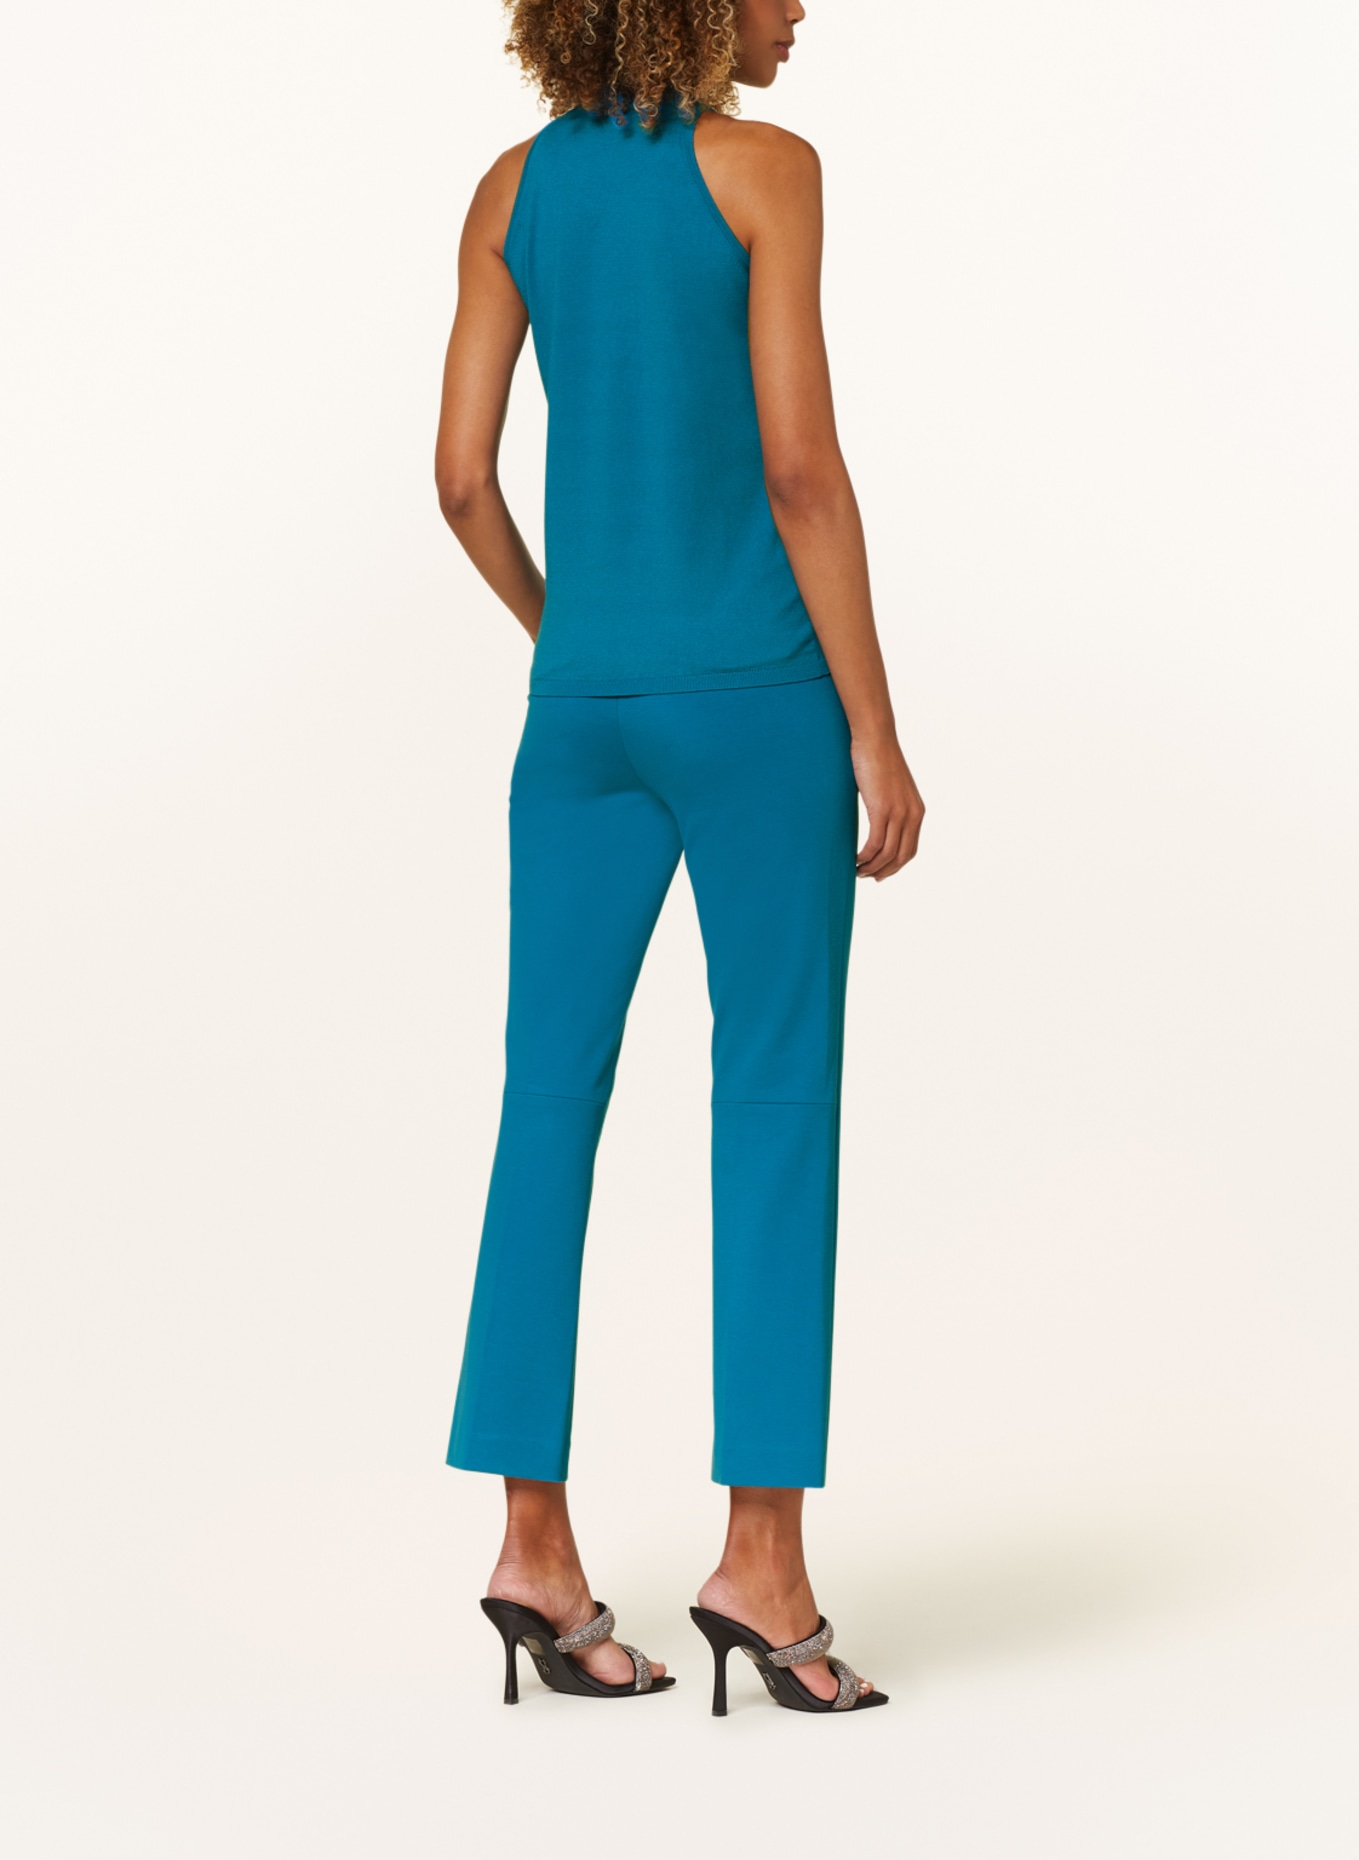 LUISA CERANO Knit top, Color: TURQUOISE (Image 3)